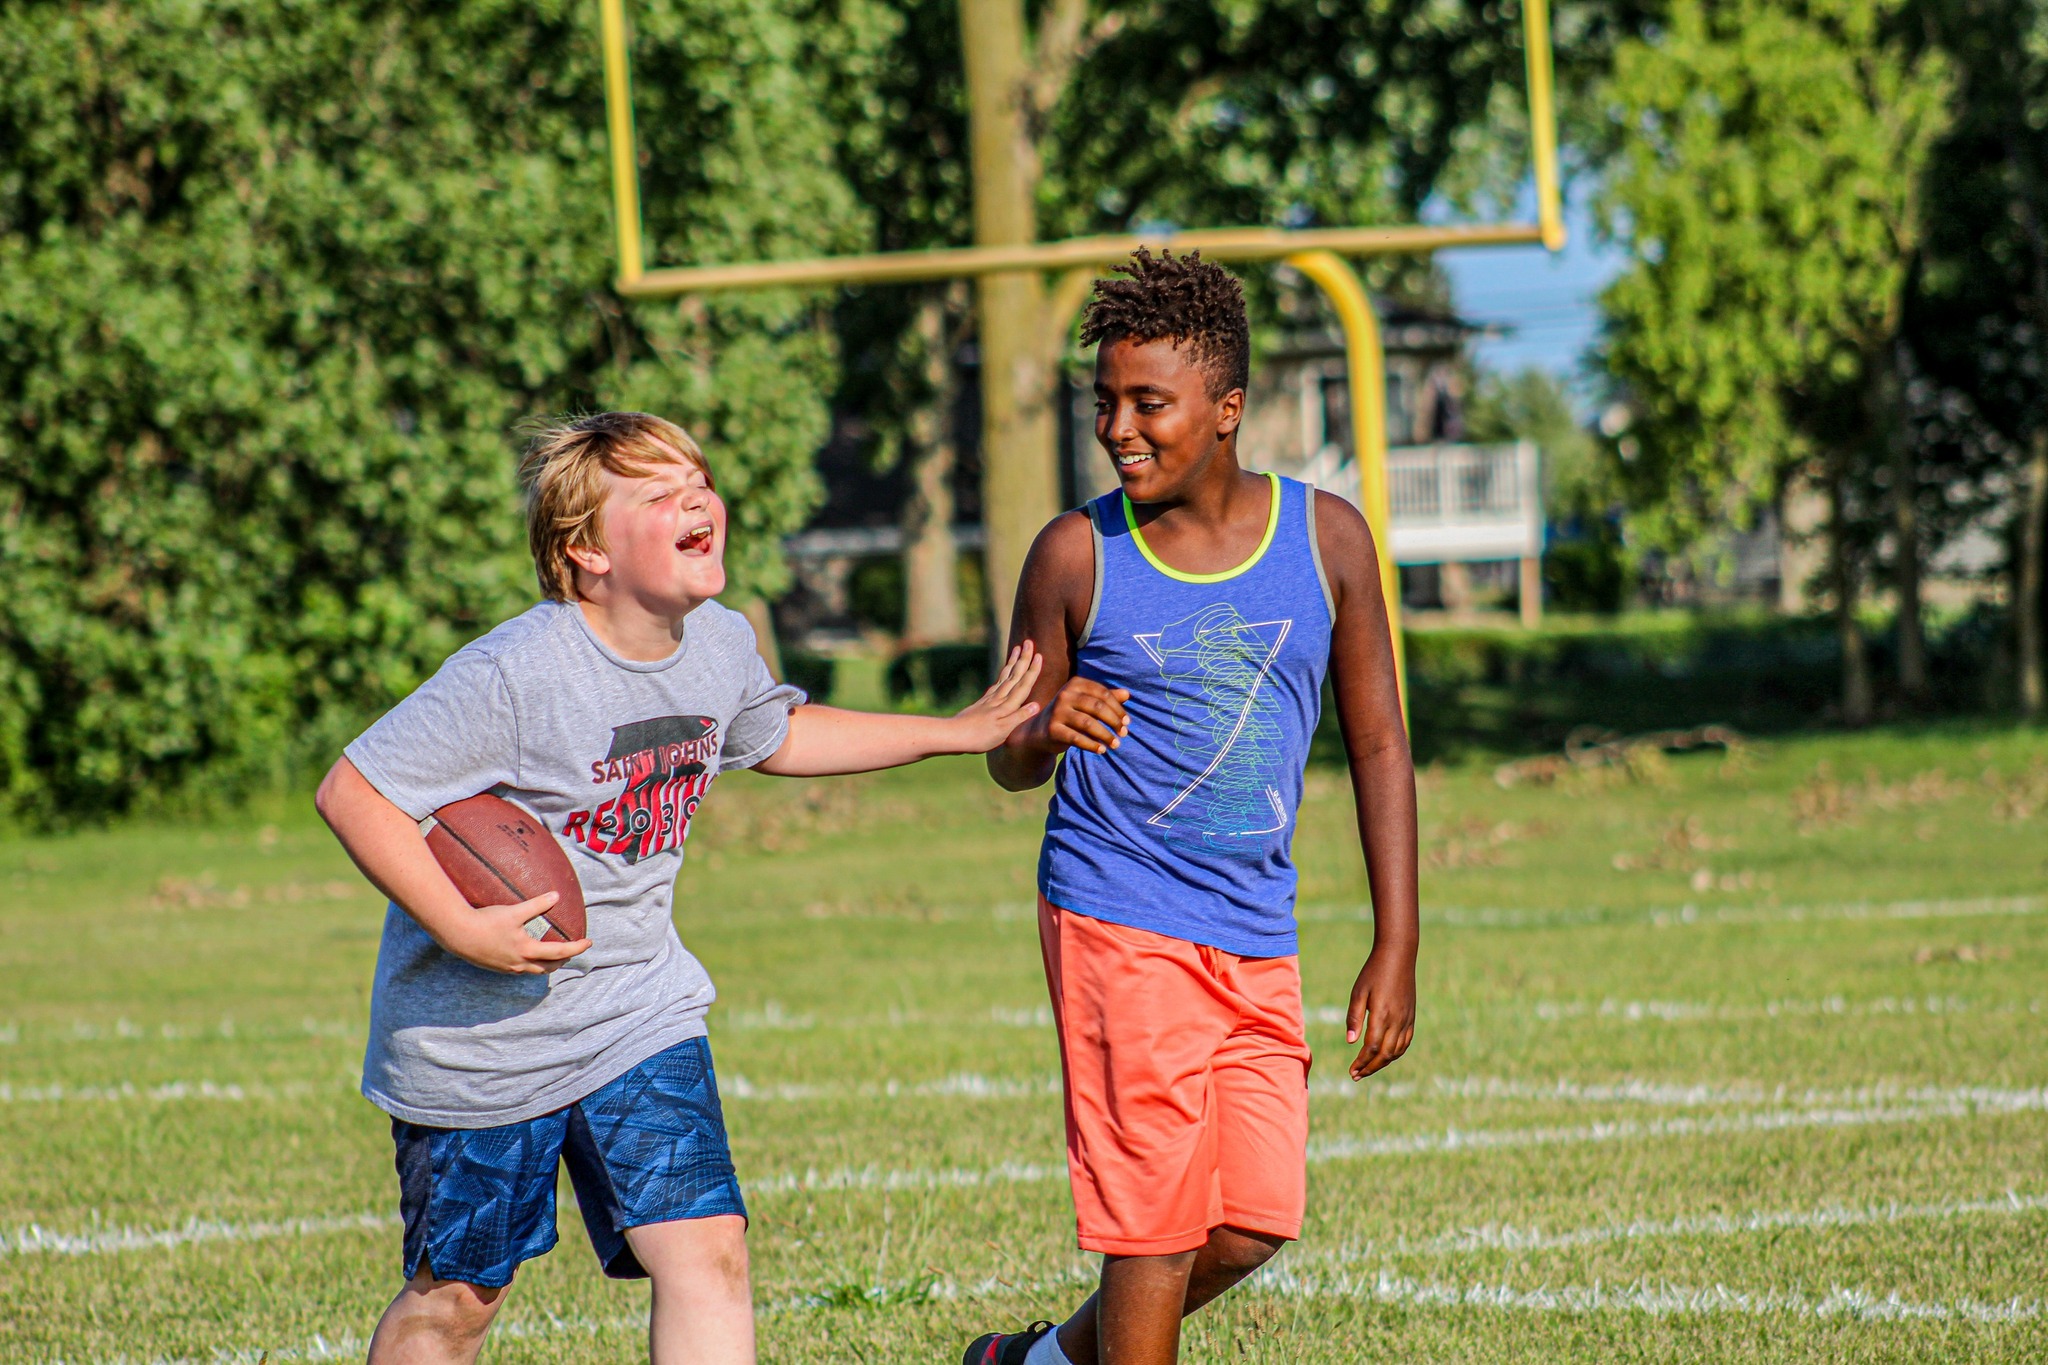 Two teens playing touch football and laughing